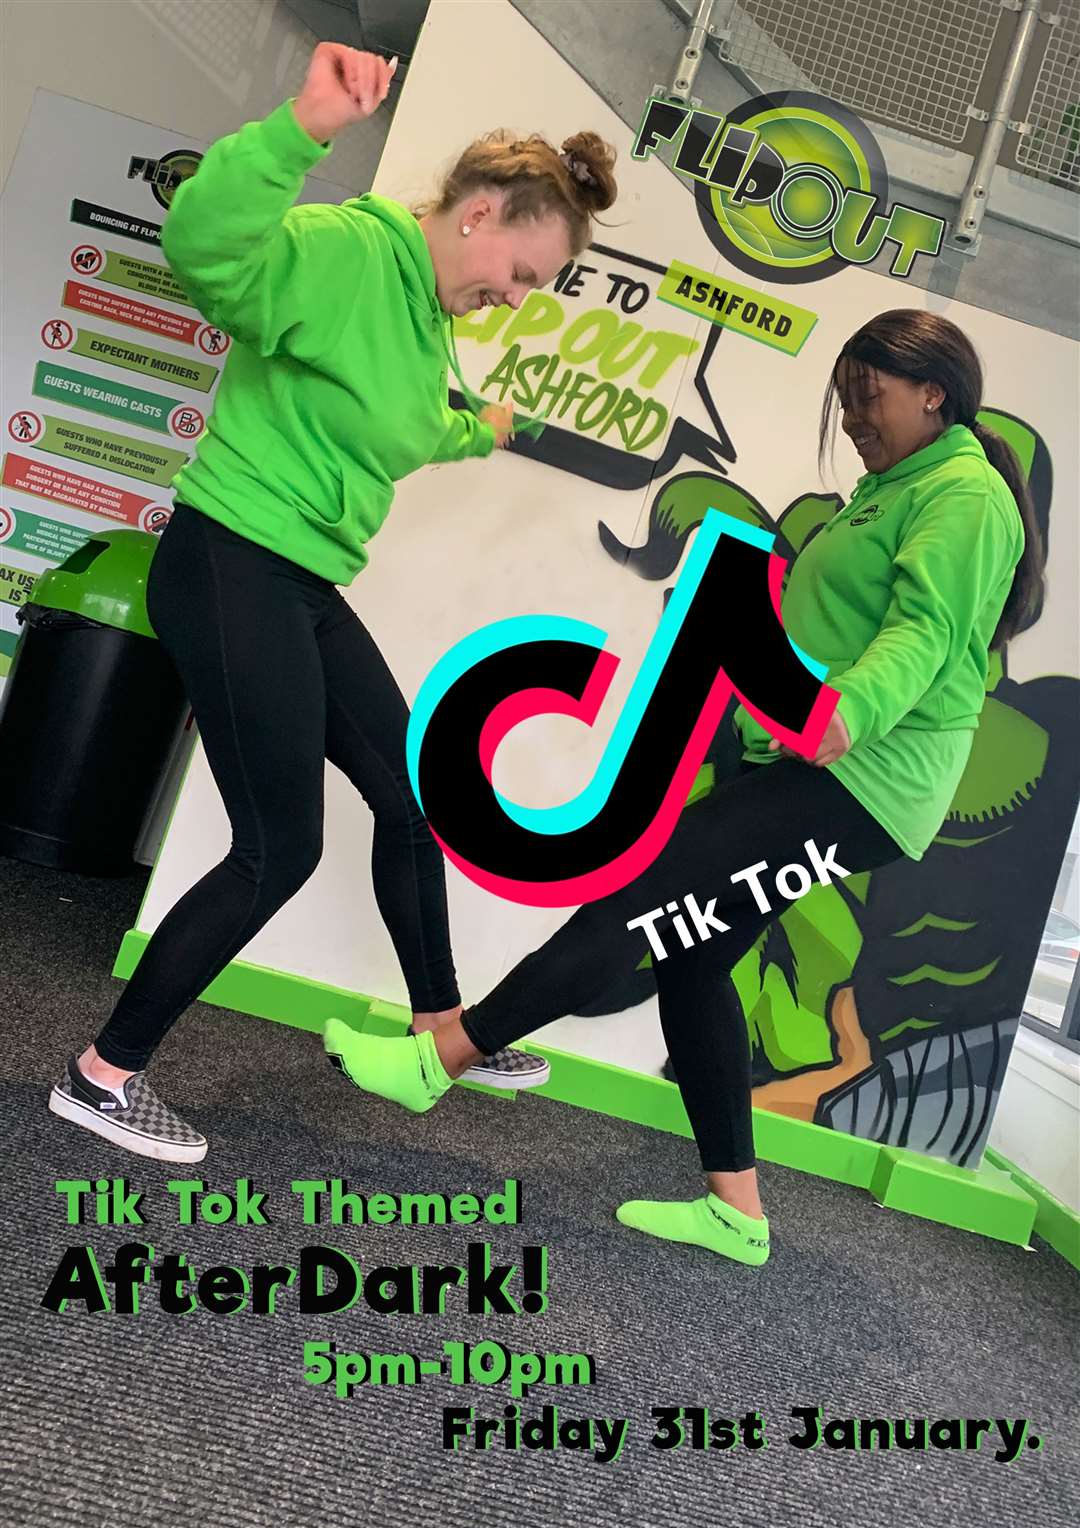 TikTok fans are being invited to Flip Out in Ashford